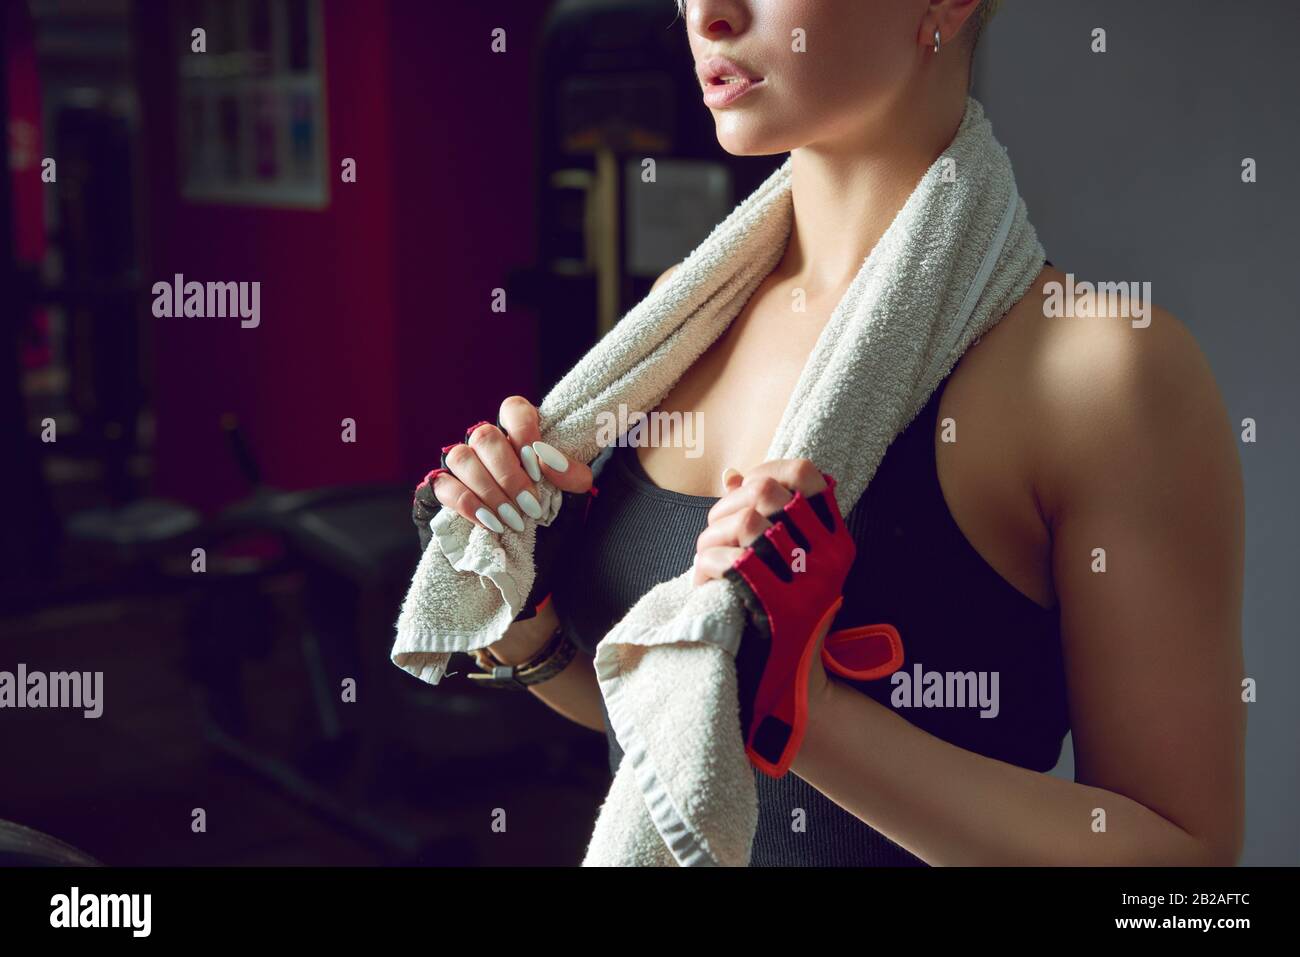 Conviction focused determined passionate confident powerful eyes stare intense athlete exercise trainer Stock Photo